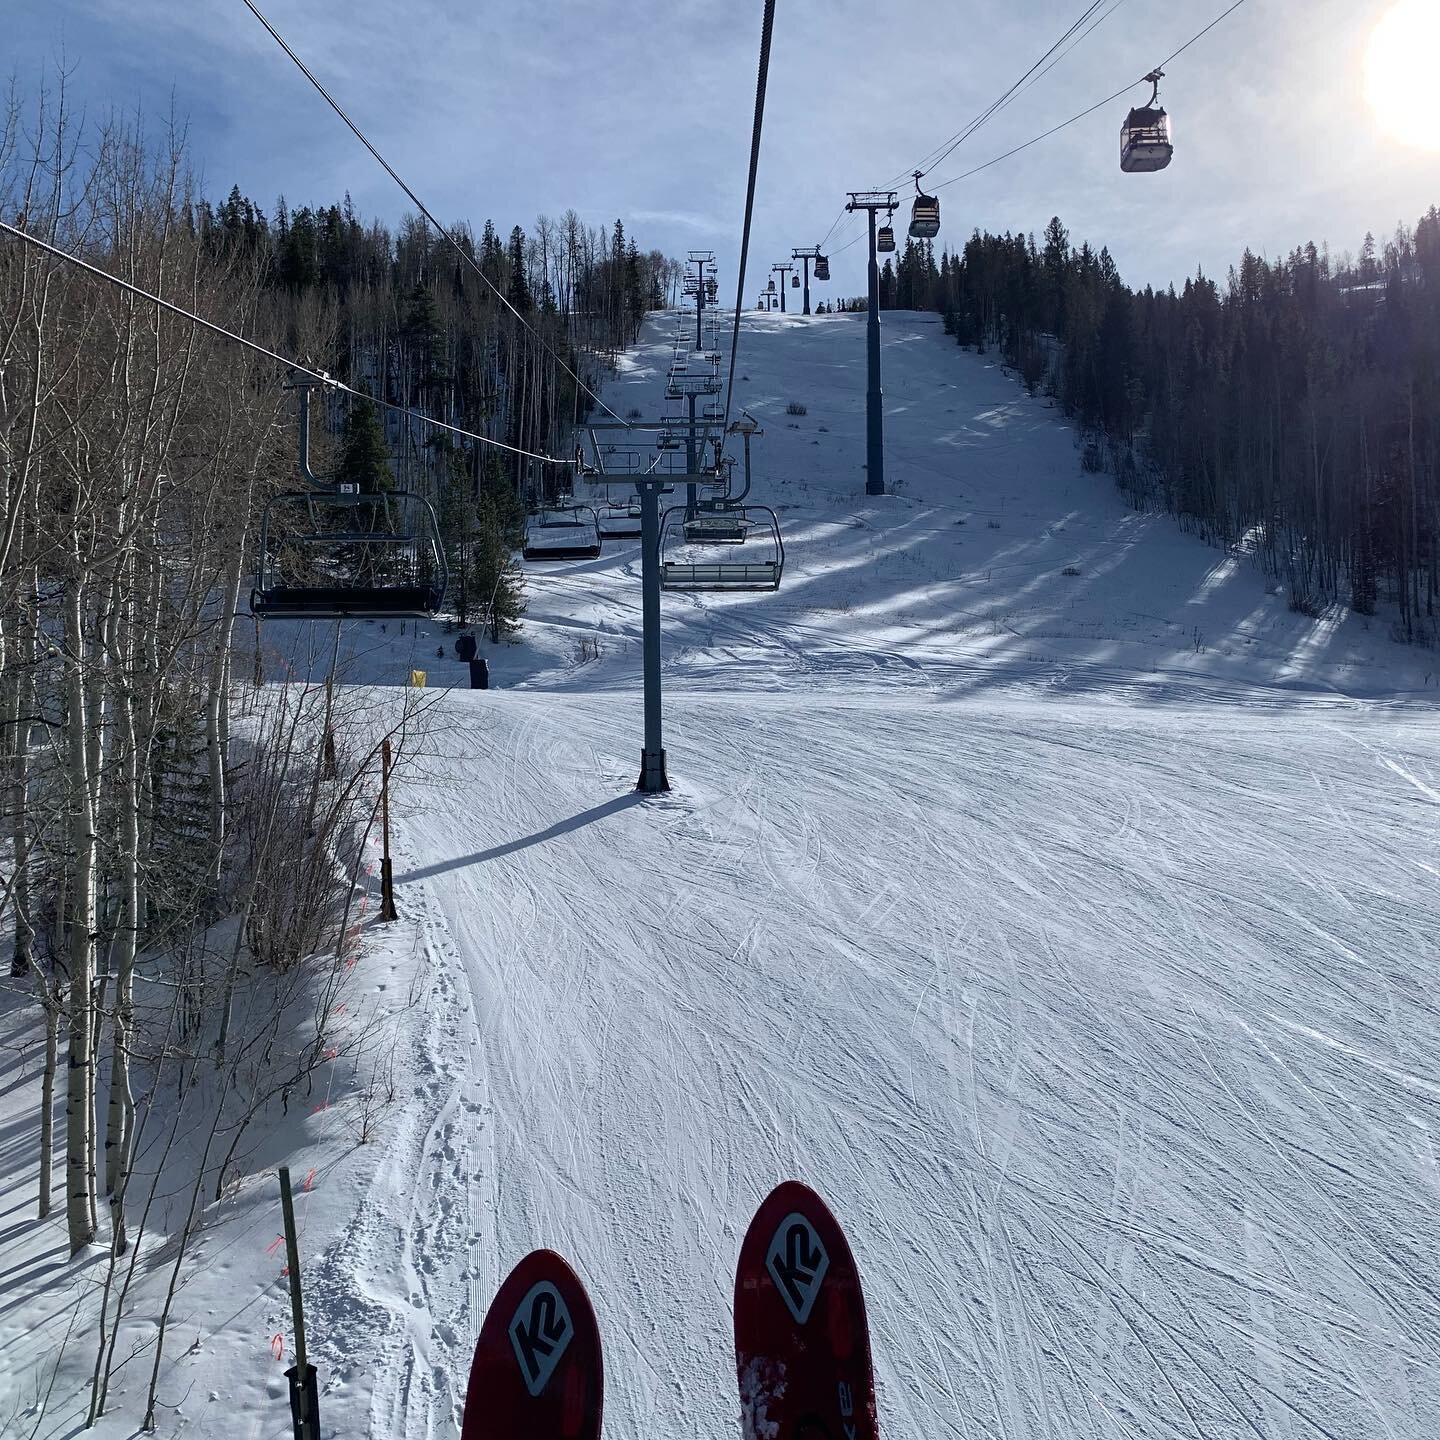 Headed up today for day number 2. I love the views in the winter from the top of Vail. Made a new friend who let me ski with him on his 71st birthday. A new goal of mine is to be able to ski as well as Dennis when I&rsquo;m that age. 7900 vertical fe